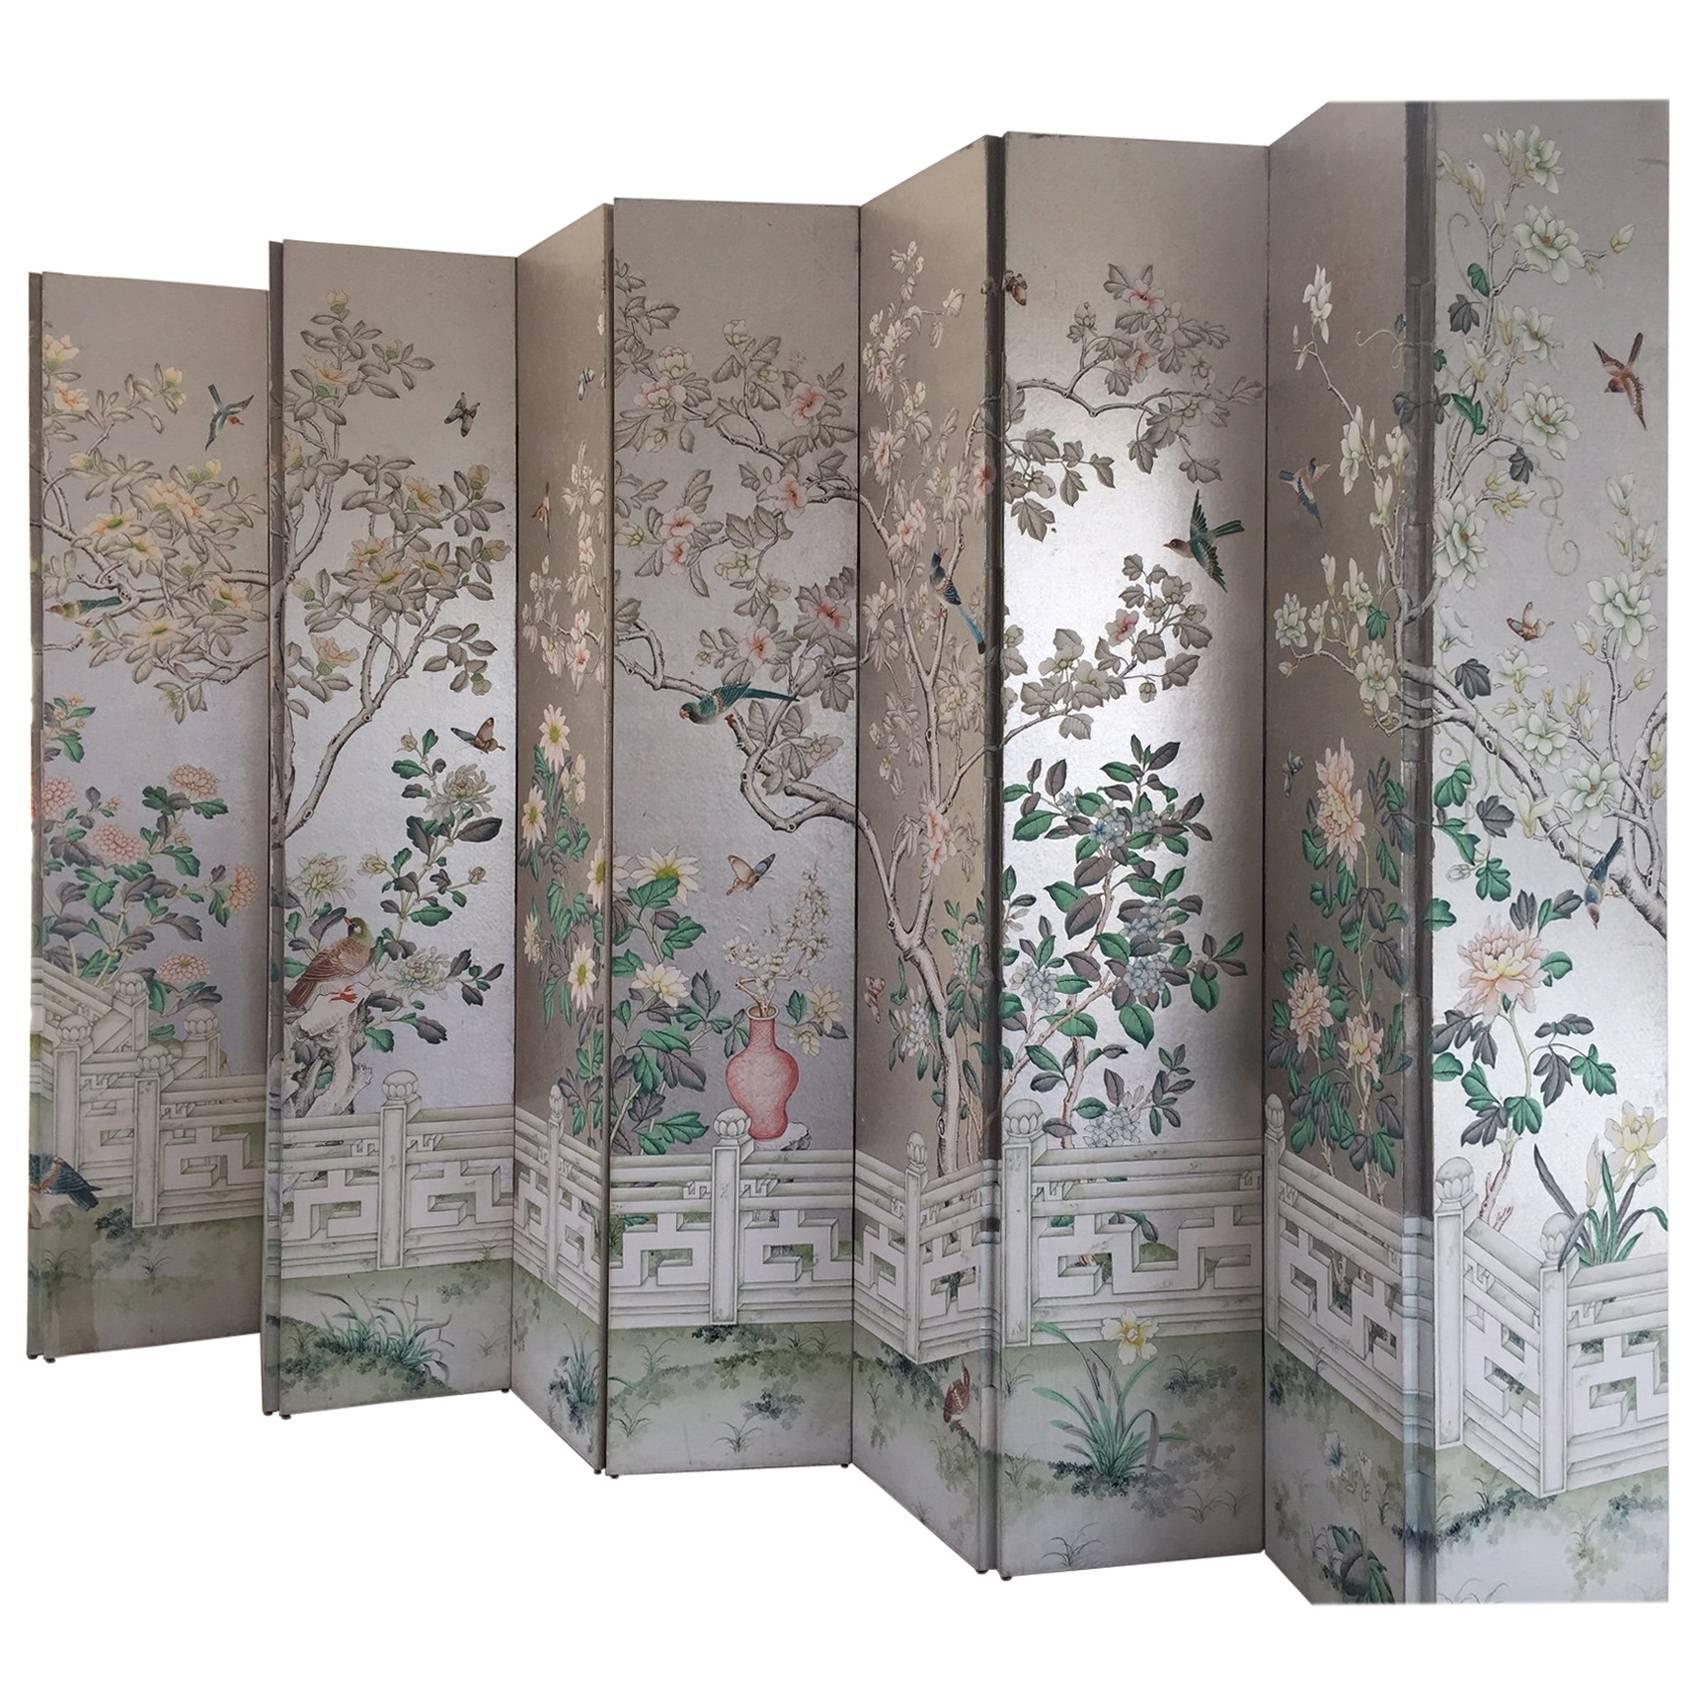 Magnificent and Monumental Silver Leaf Hand-Painted 5 Panel Screen